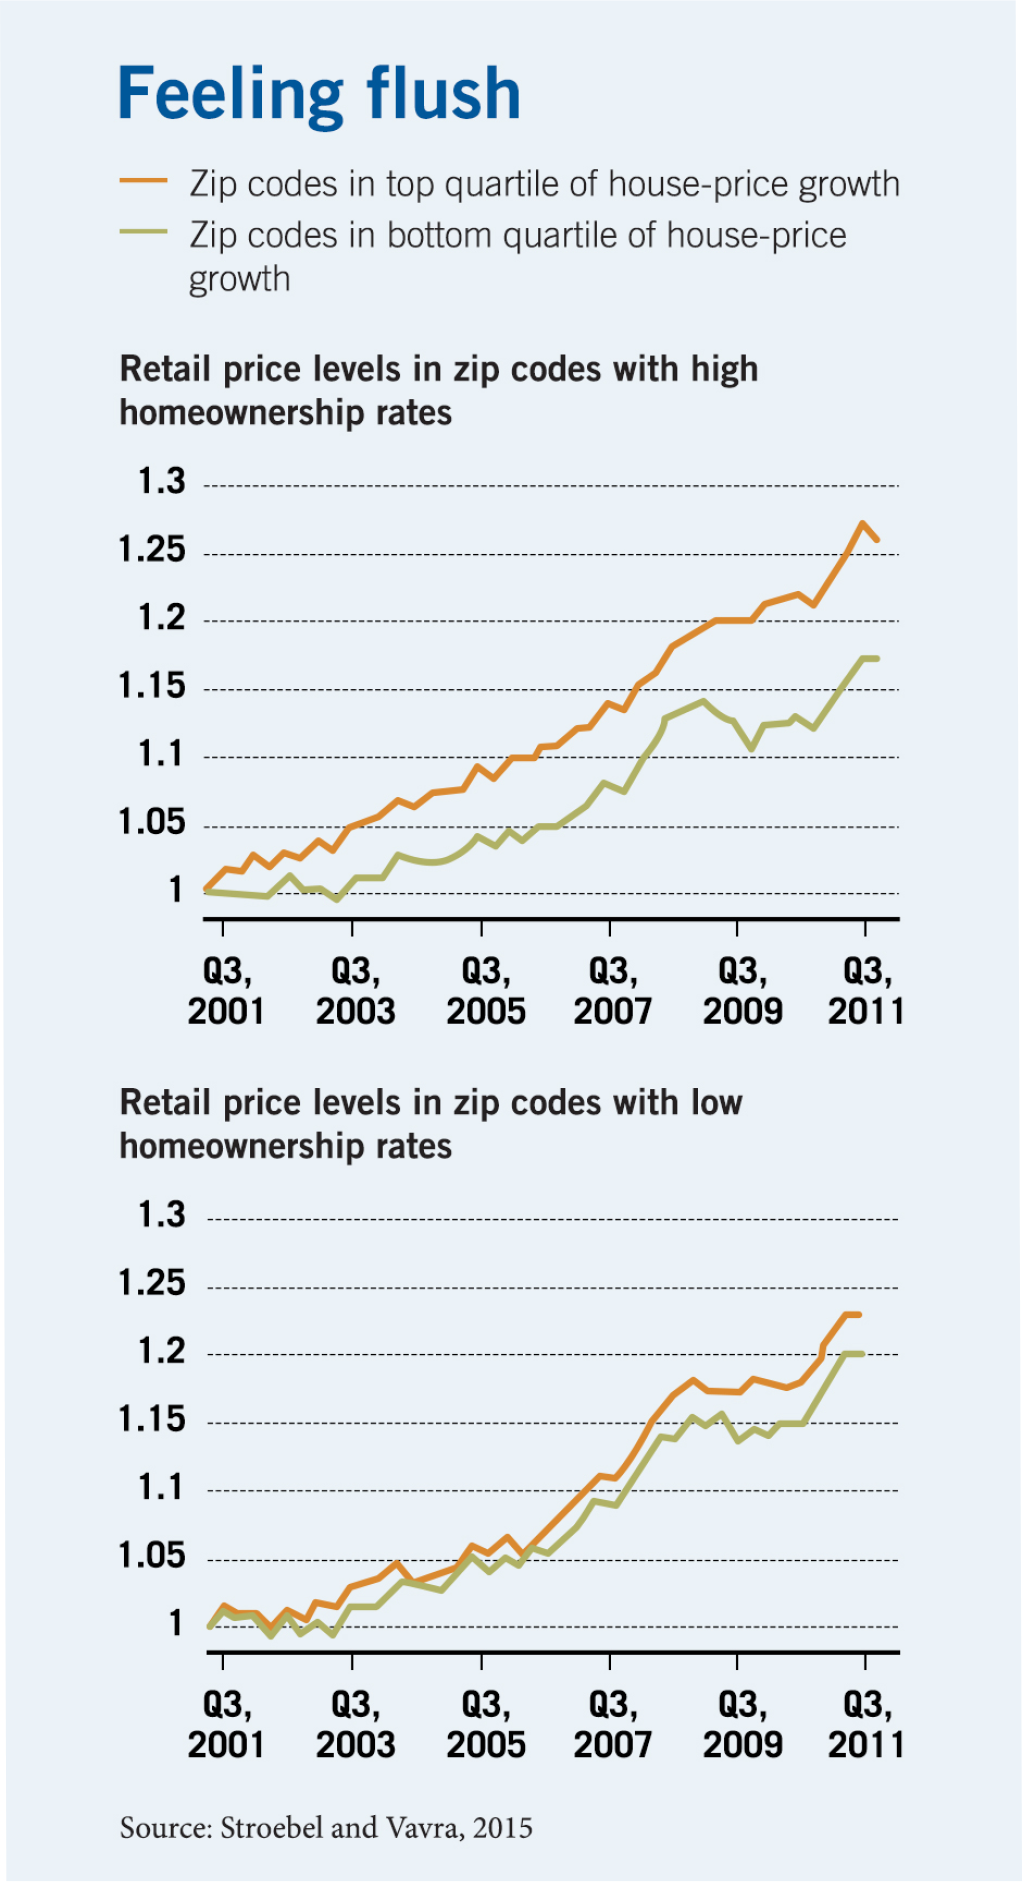 Two bar charts plotting retail prices as an index, with one equaling levels during in the third quarter of 2001 and the years of 2001 to 2011 on the x-axis. The first chart shows zip codes with high homeownership rates, with one line tracking those in the top quartile of house price growth rising to a retail-price index value of nearly one-point-three, and a second line tracking the bottom quartile rising to a retail-price index value of less than one one-point-two. The second chart shows zip codes with low homeownership, with both lines following a nearly parallel path and rising to values between one-point-two and one-point-two-five.